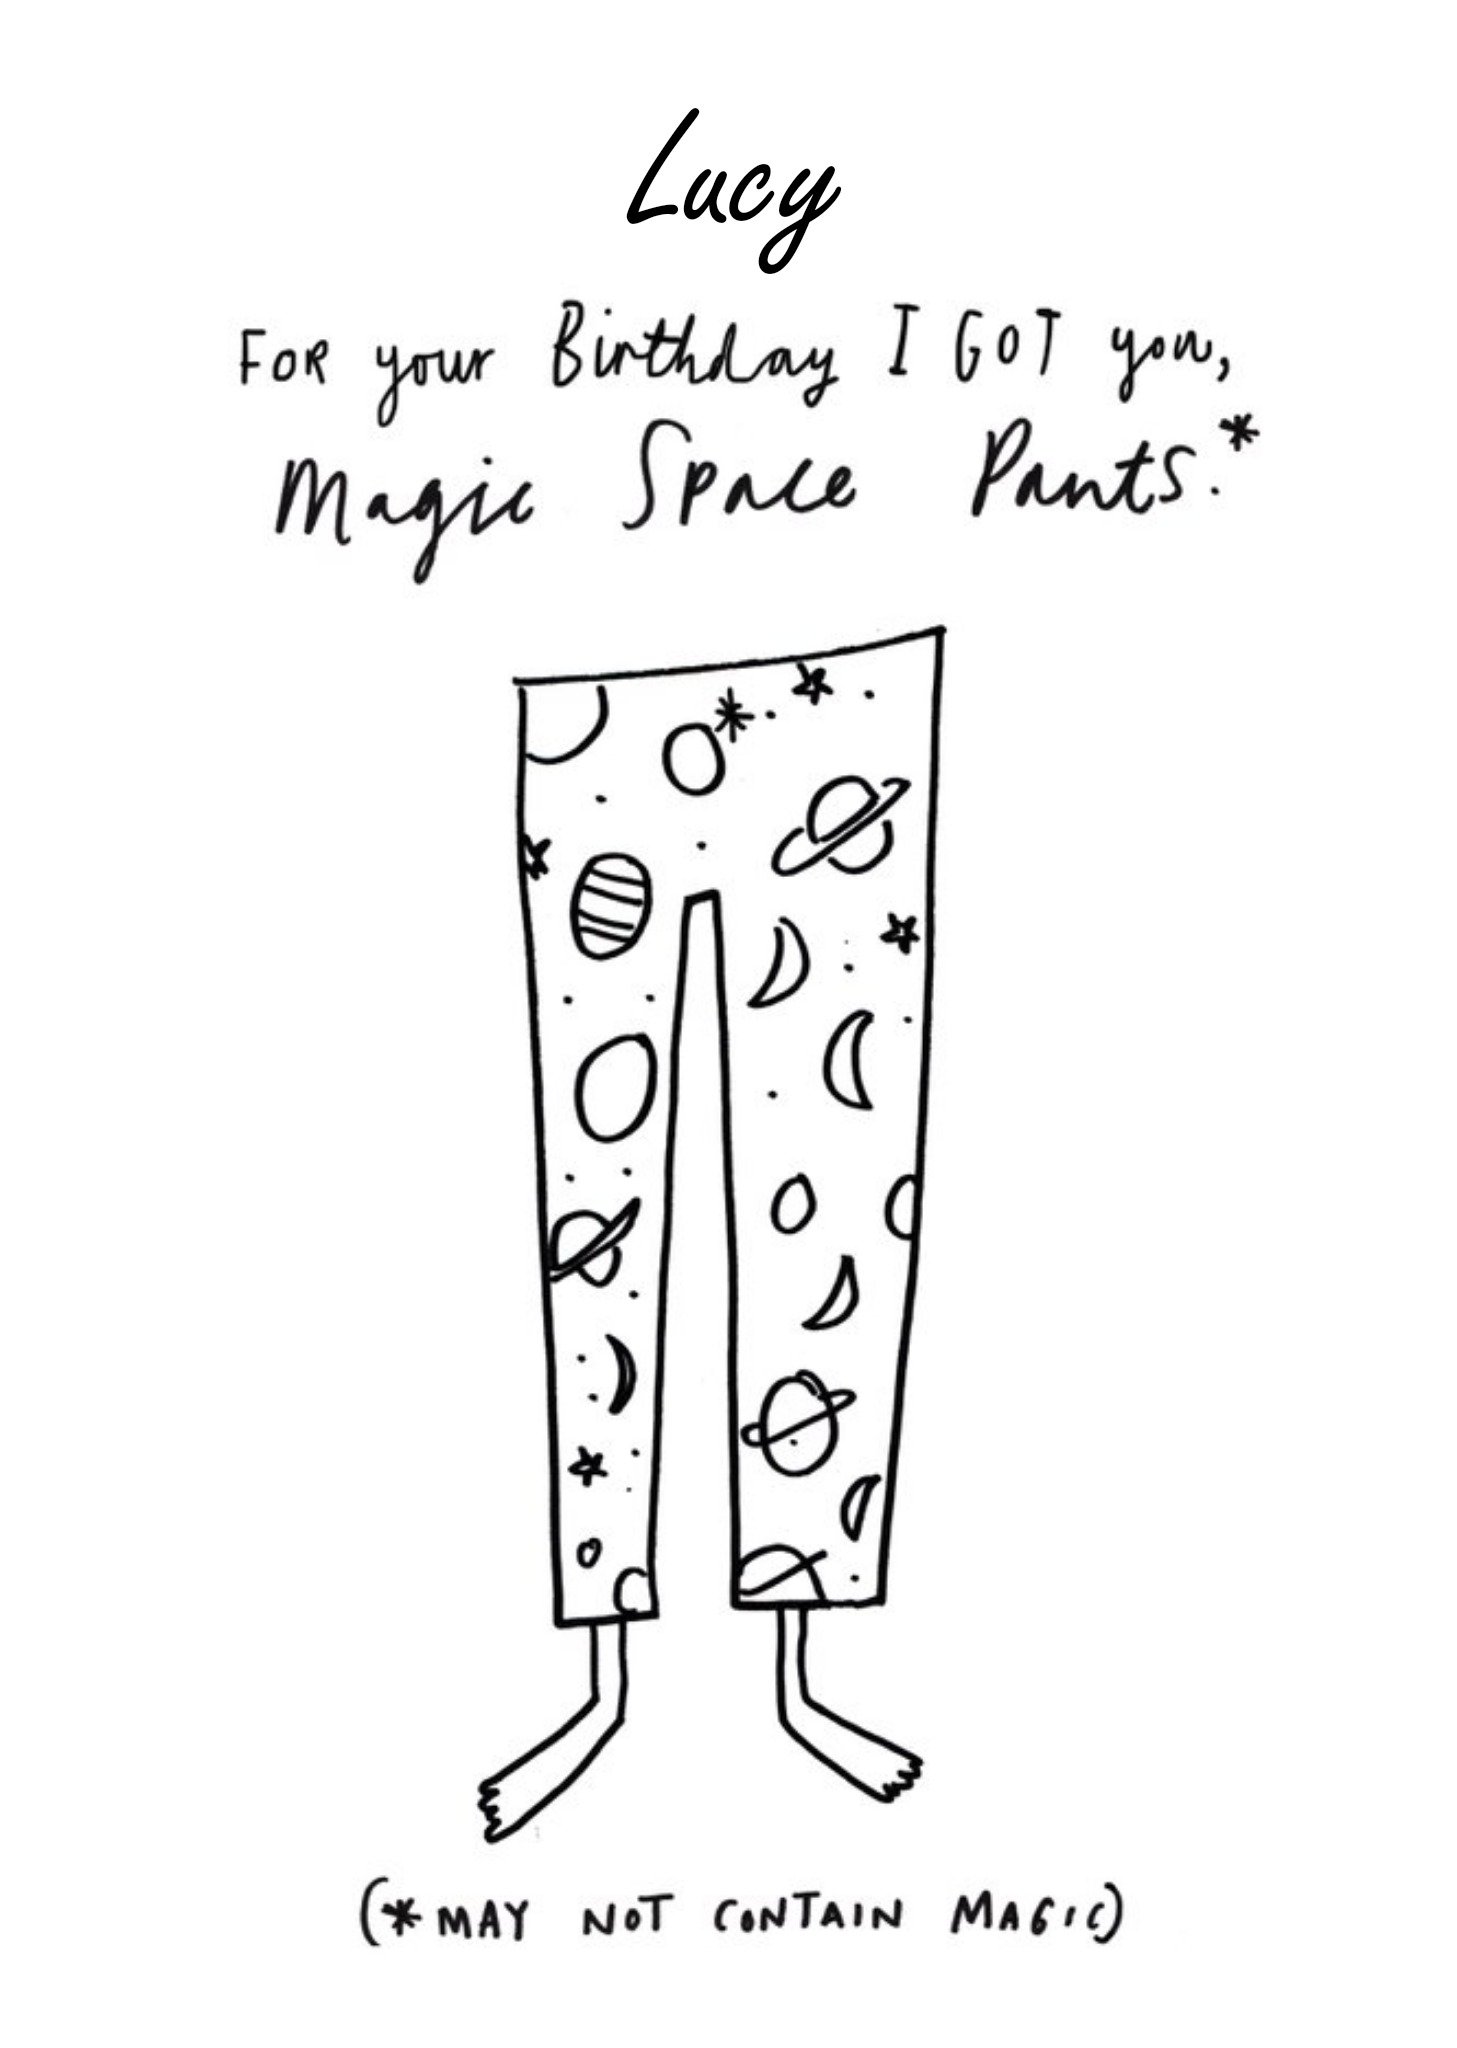 Moonpig I Got You Magic Space Pants Personalised Happy Birthday Card, Large